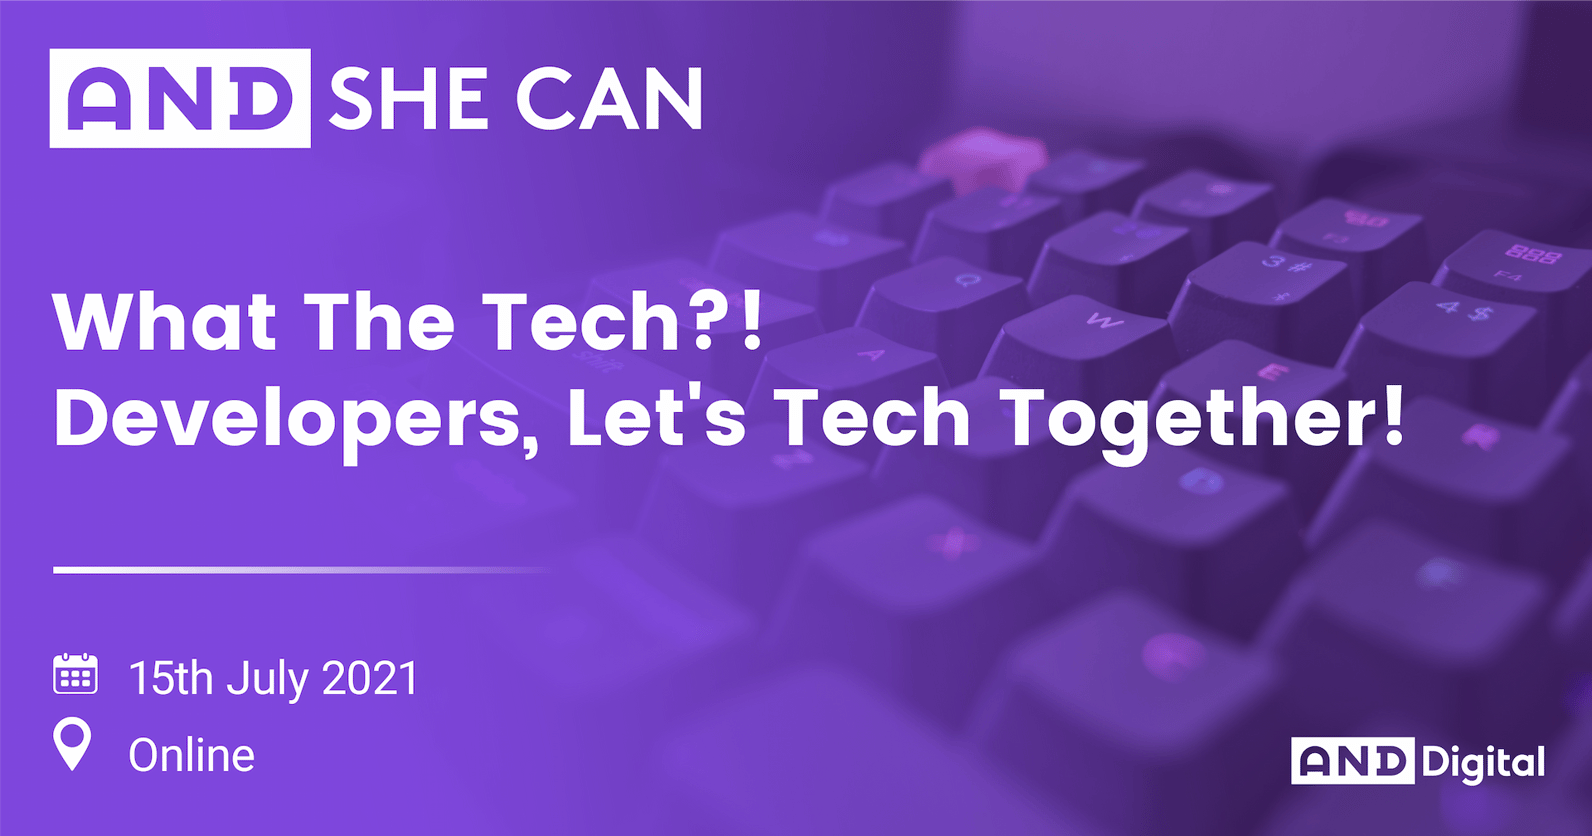 AND She Can- What the Tech_! Developers - Lets Tech Together! (1)